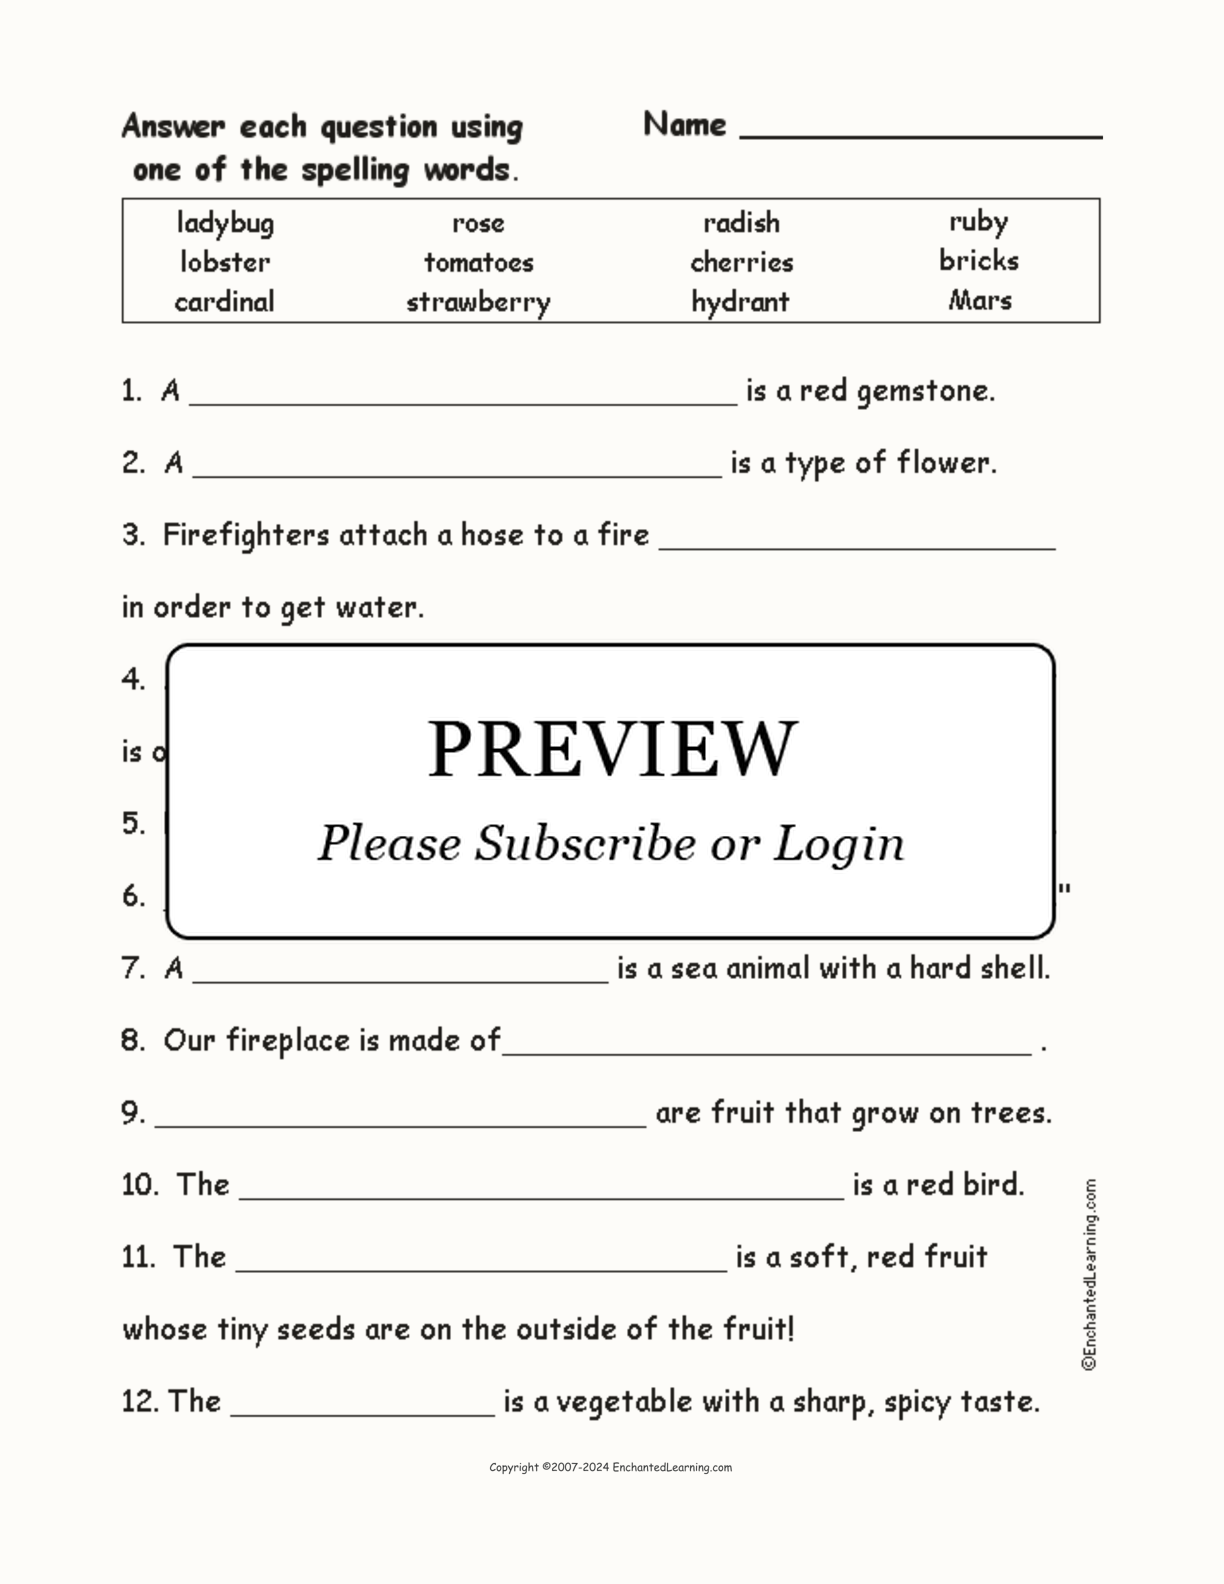 Red Things: Spelling Word Questions interactive worksheet page 1